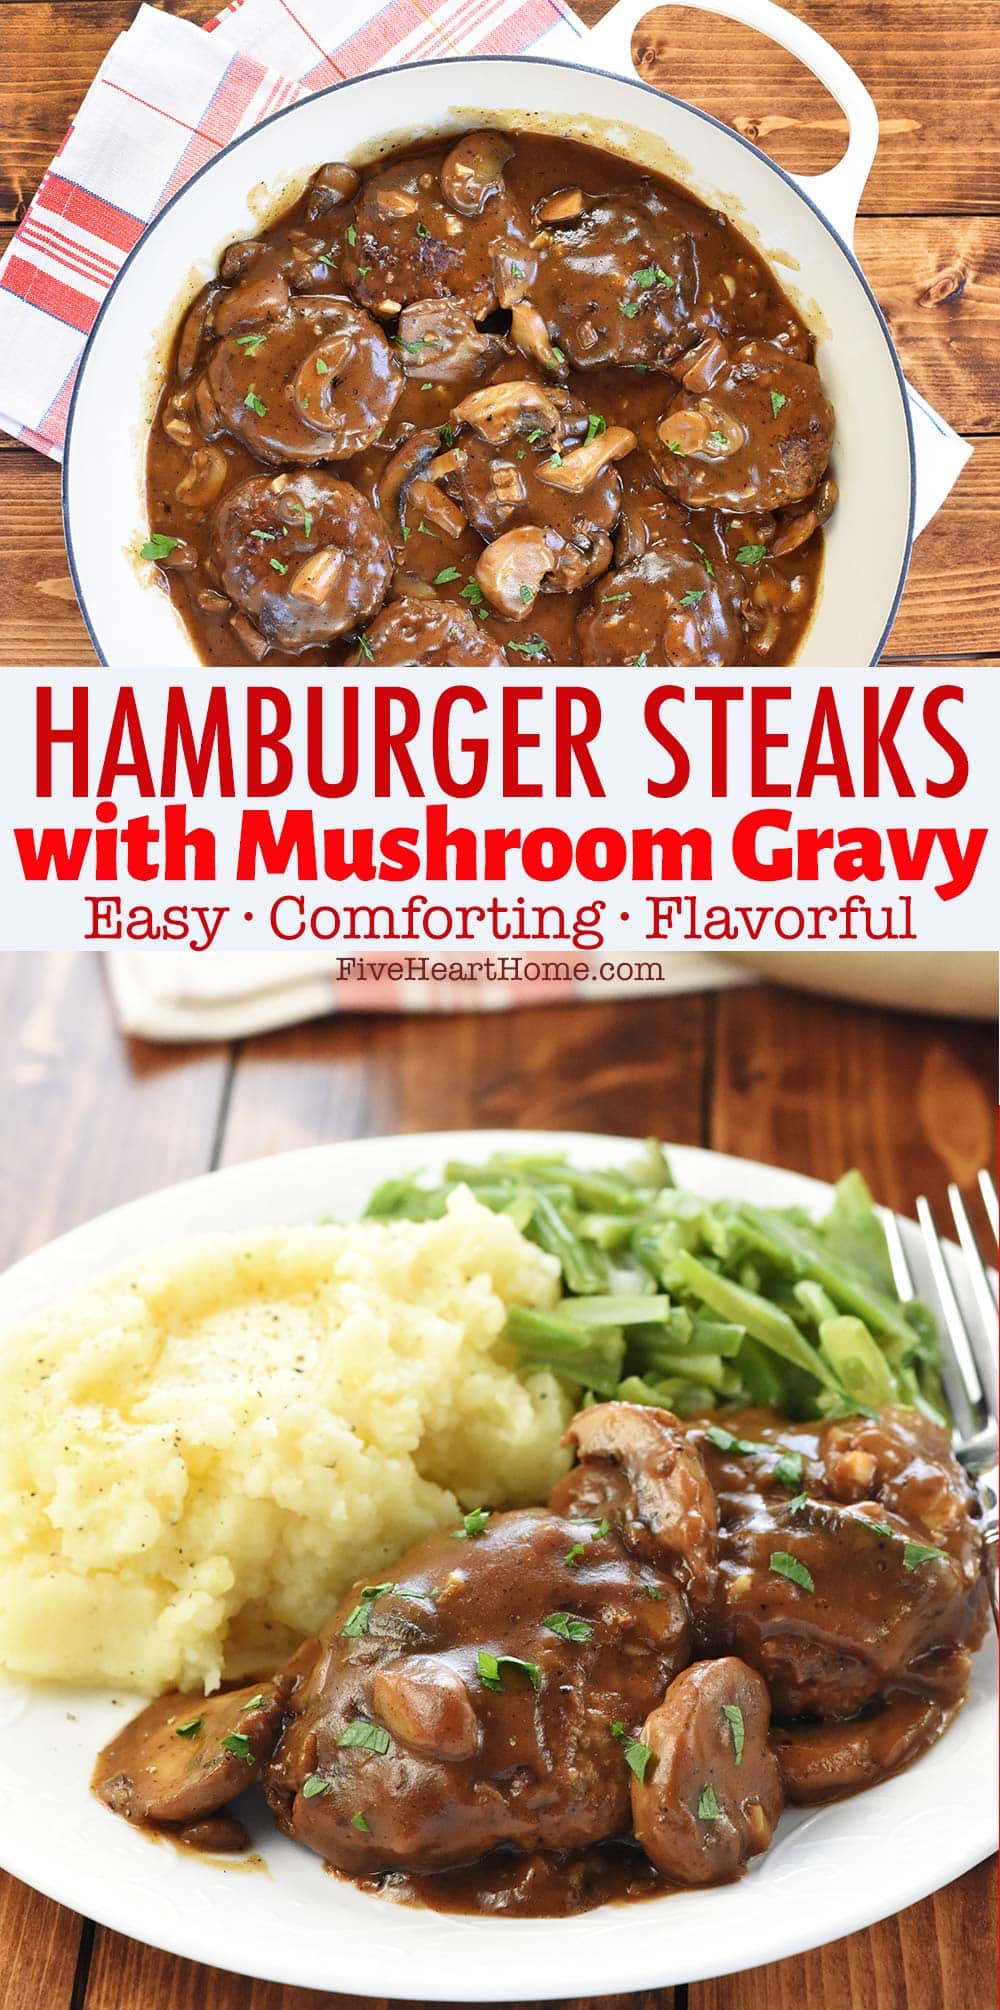 Hamburger Steak with Mushroom Gravy ~ a classic, comforting, quick and easy dinner recipe of mini Salisbury steaks in a rich, savory, gravy loaded with fresh mushrooms! | FiveHeartHome.com via @fivehearthome